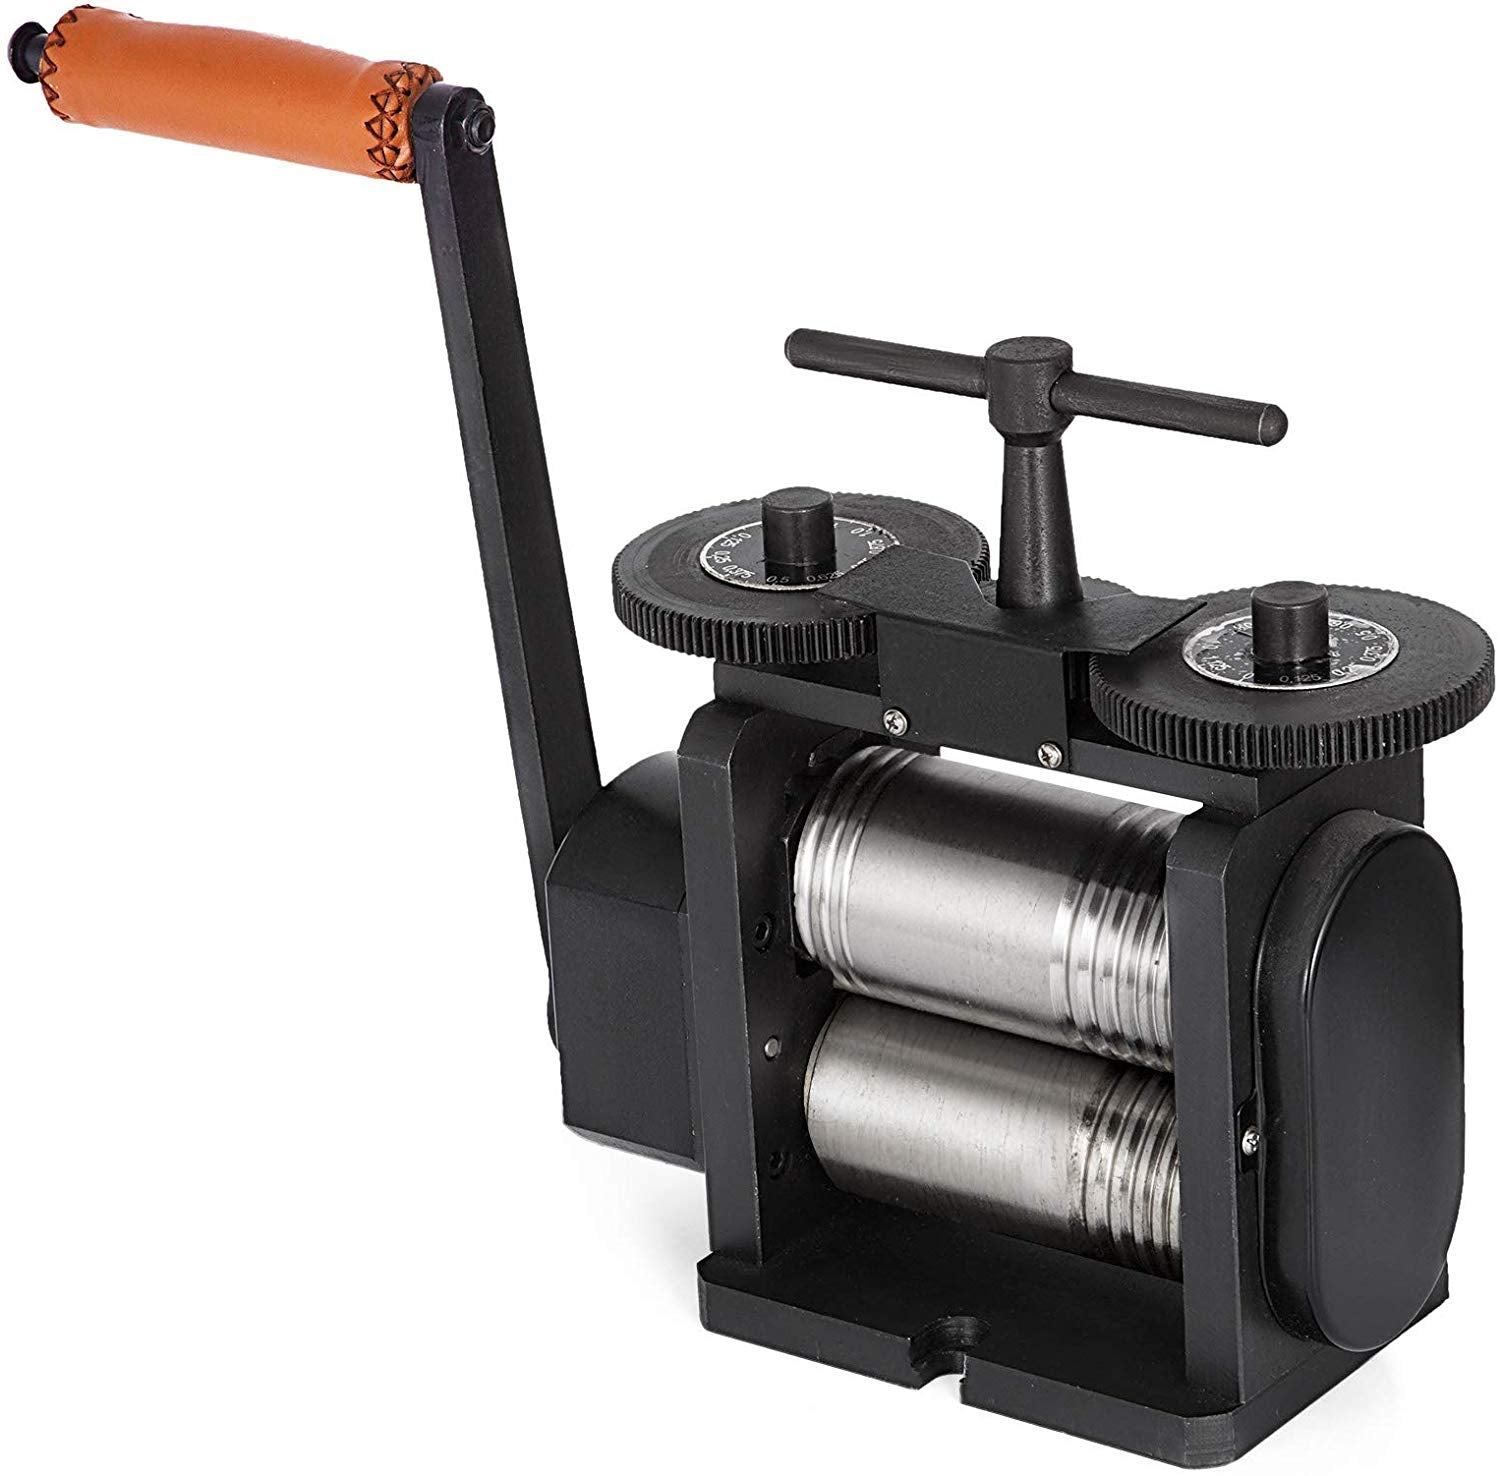 Mophorn Jewelry Rolling Mill Combination Rolling Mill 130mm Wide 65mm –  Pete's Arts, Crafts and Sewing